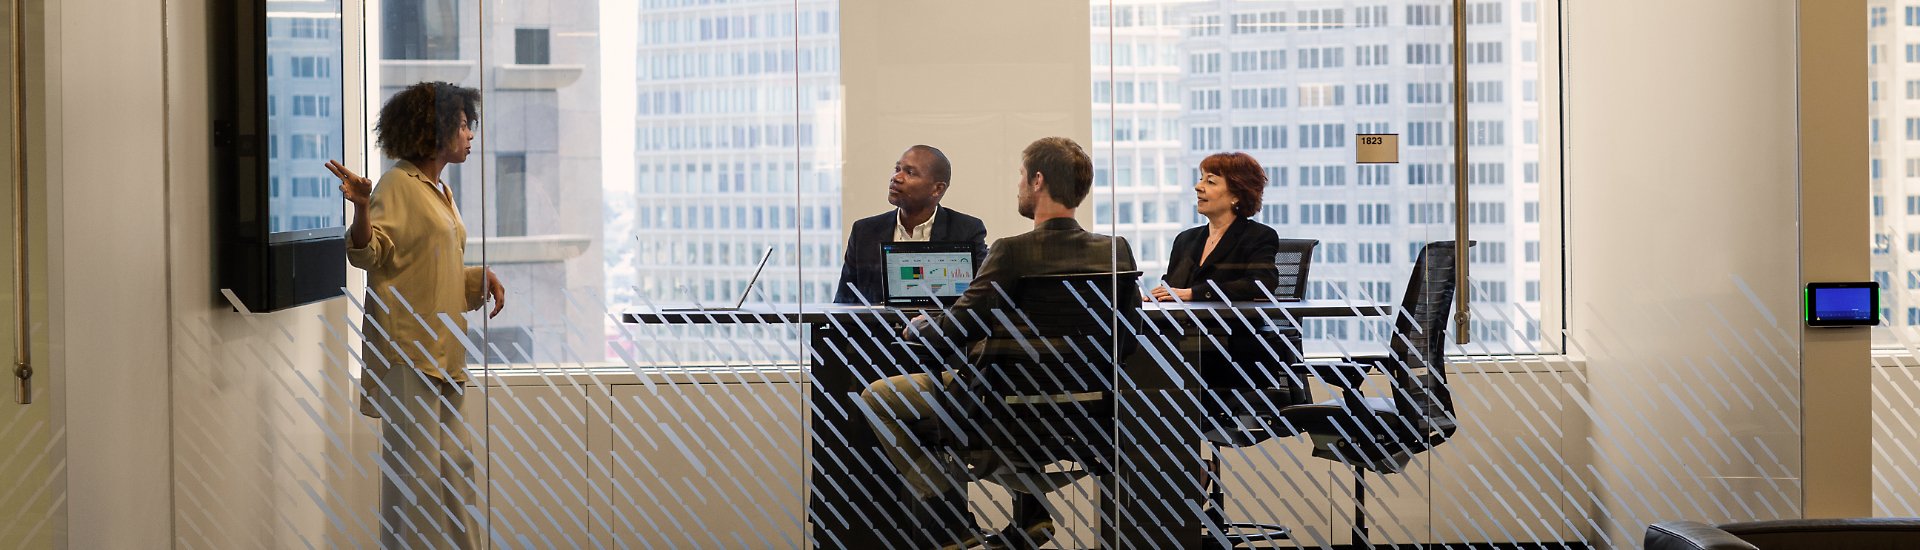 Three people seated at a table in a modern conference room watching a presentation being made by a fourth person who is standing at a large, wall-mounted display.